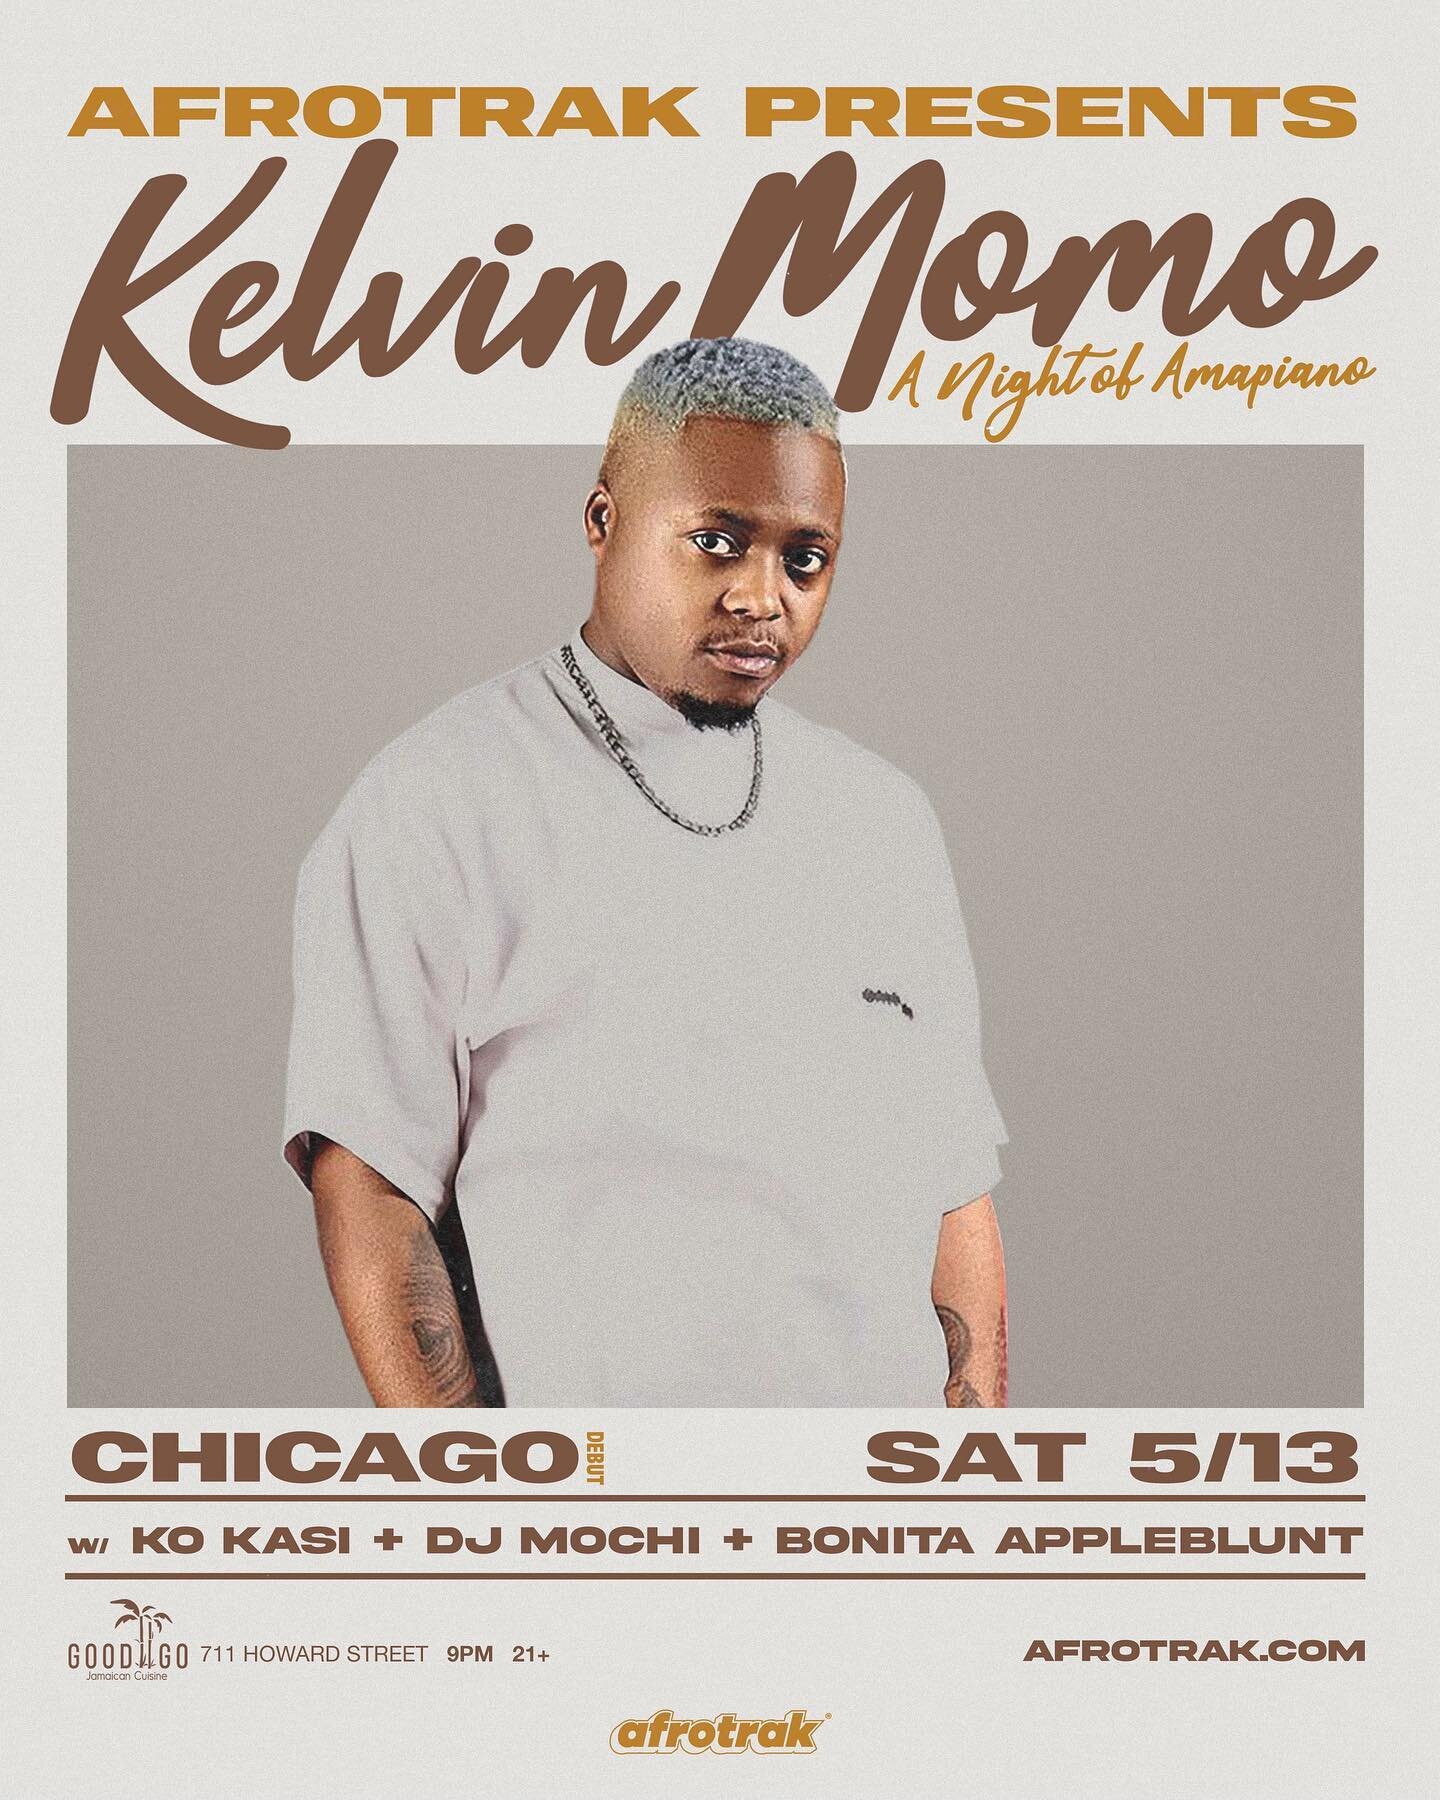 🎹Pushin Piano x @kelvinmomo_ 🚨 

Honored to share the stage next month with one of South Africa&rsquo;s hottest DJs/producers. Shoutout @afrotrak for continuing to bring amazing talent to Chicago. Tix available in bio!